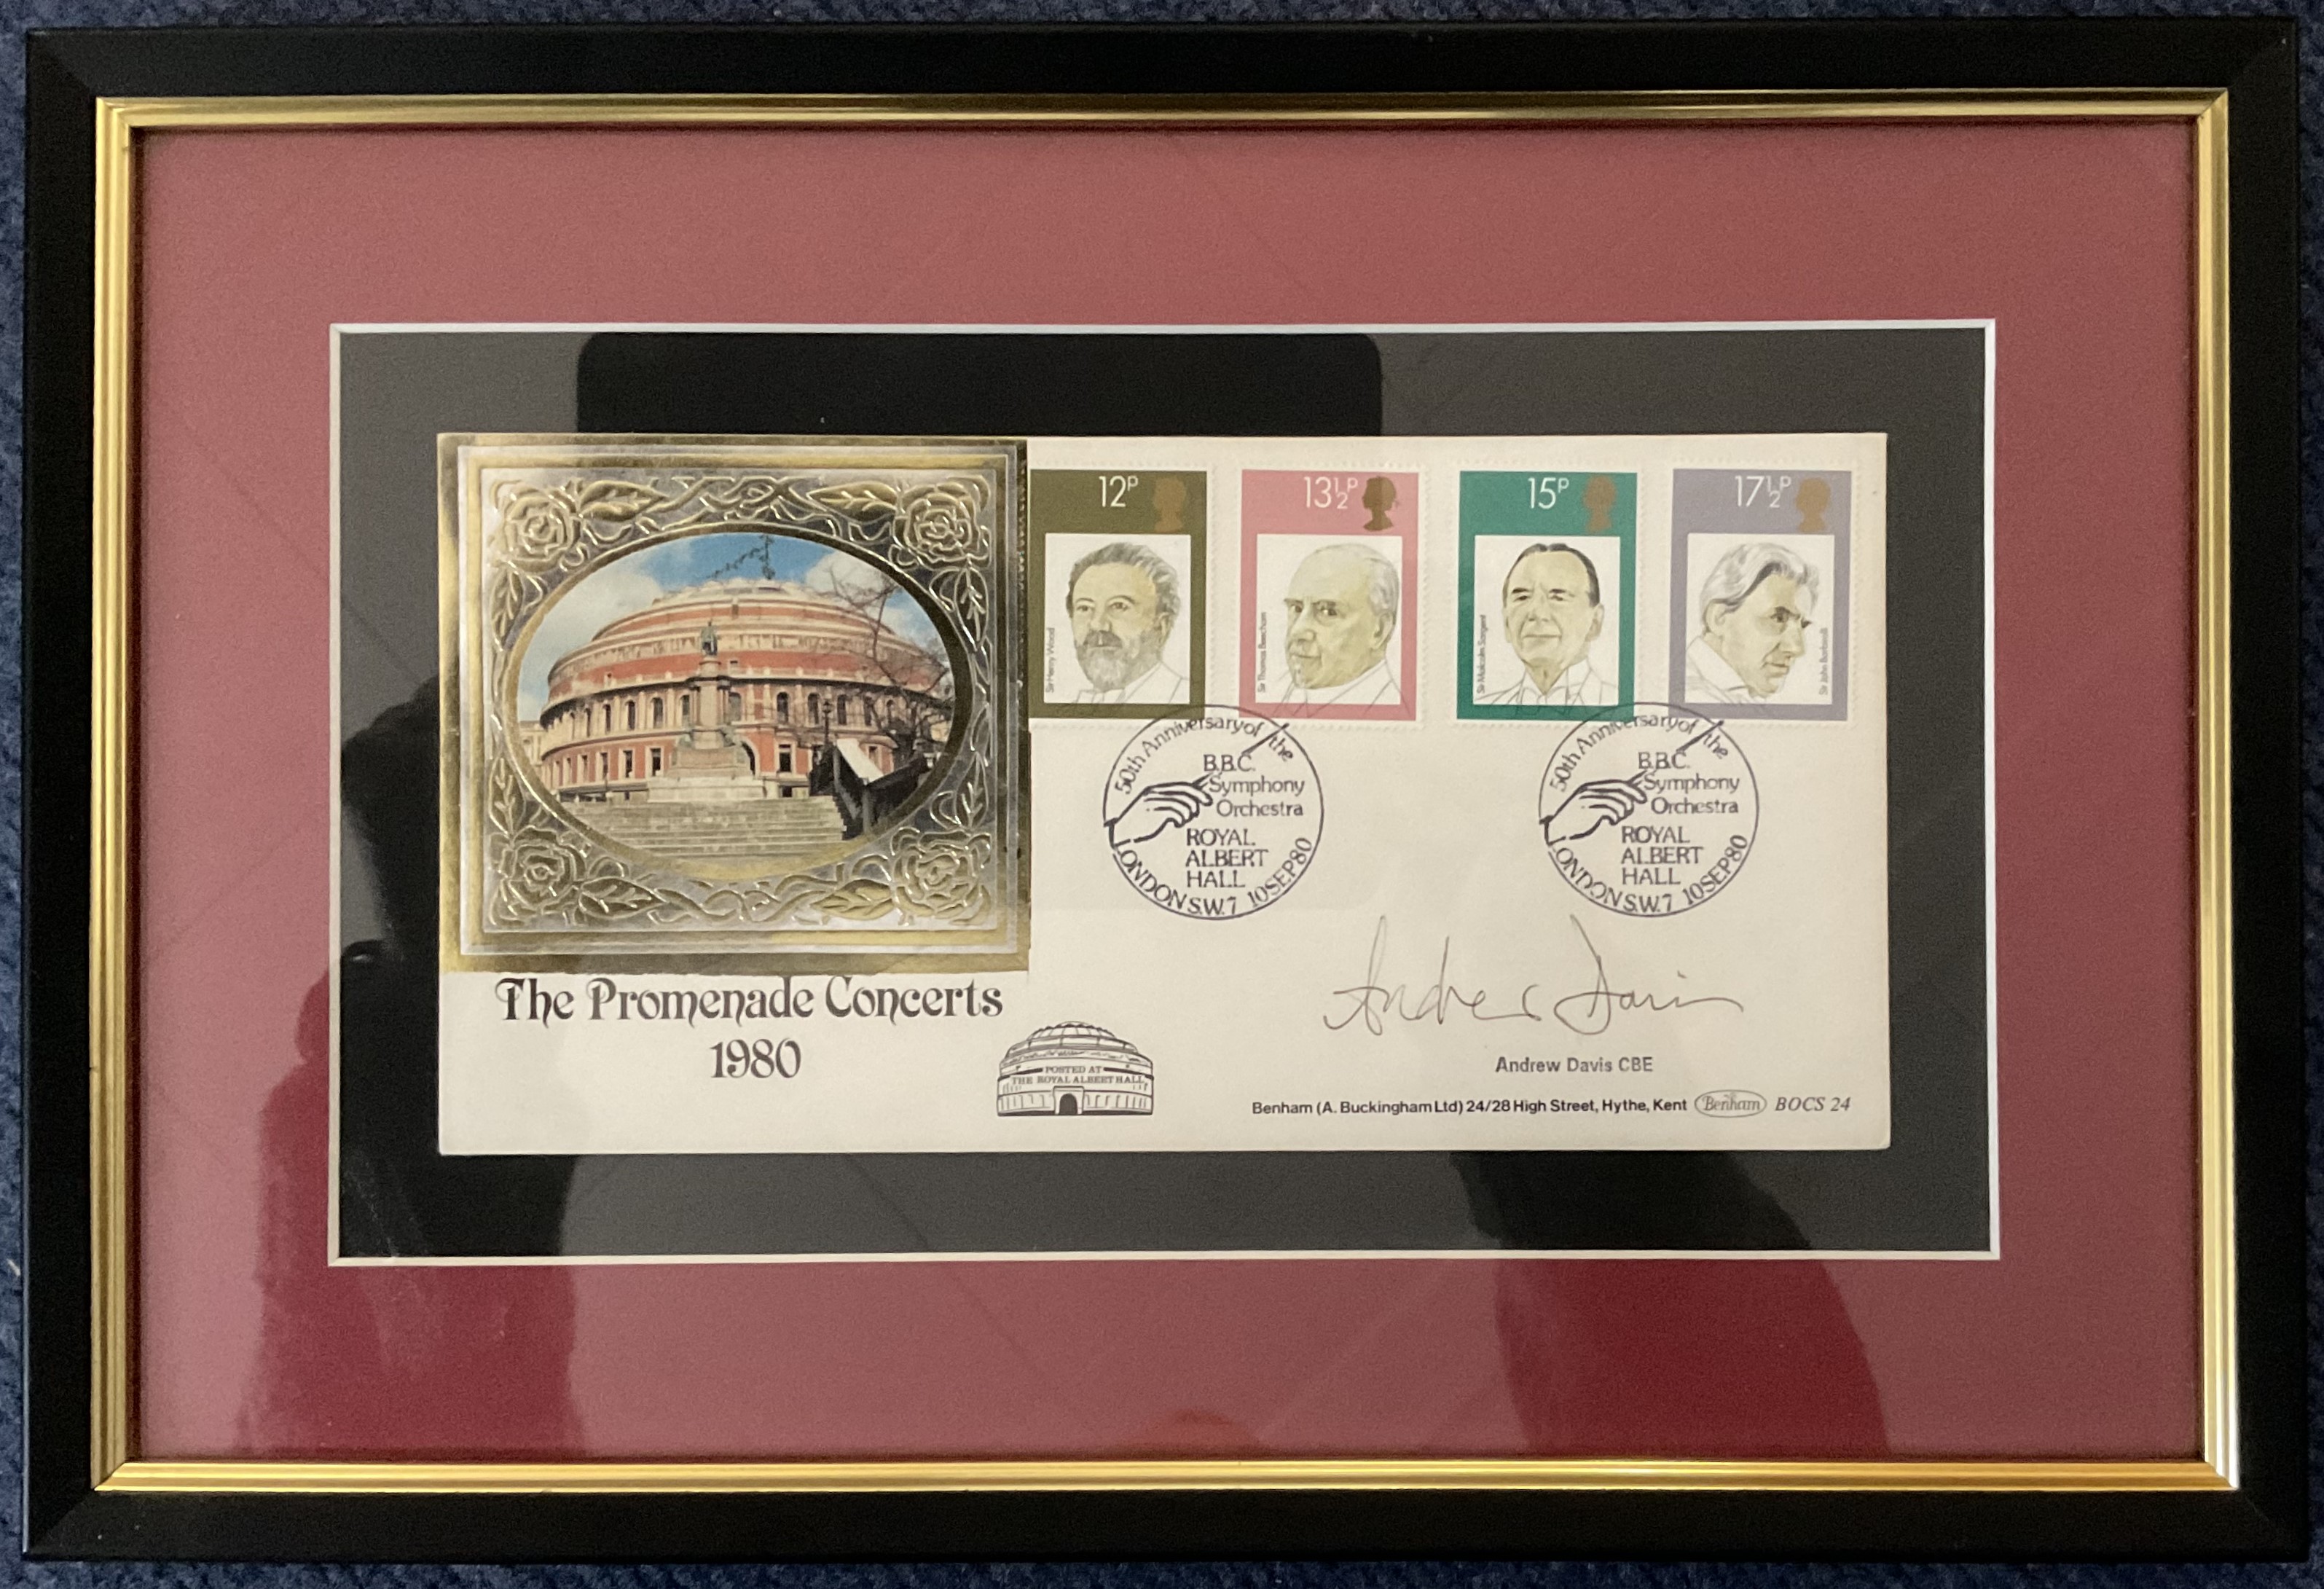 Andrew Davis CBE 14x9 mounted and framed The Promenade Concerts 1980 Benham FDC double pm 50th